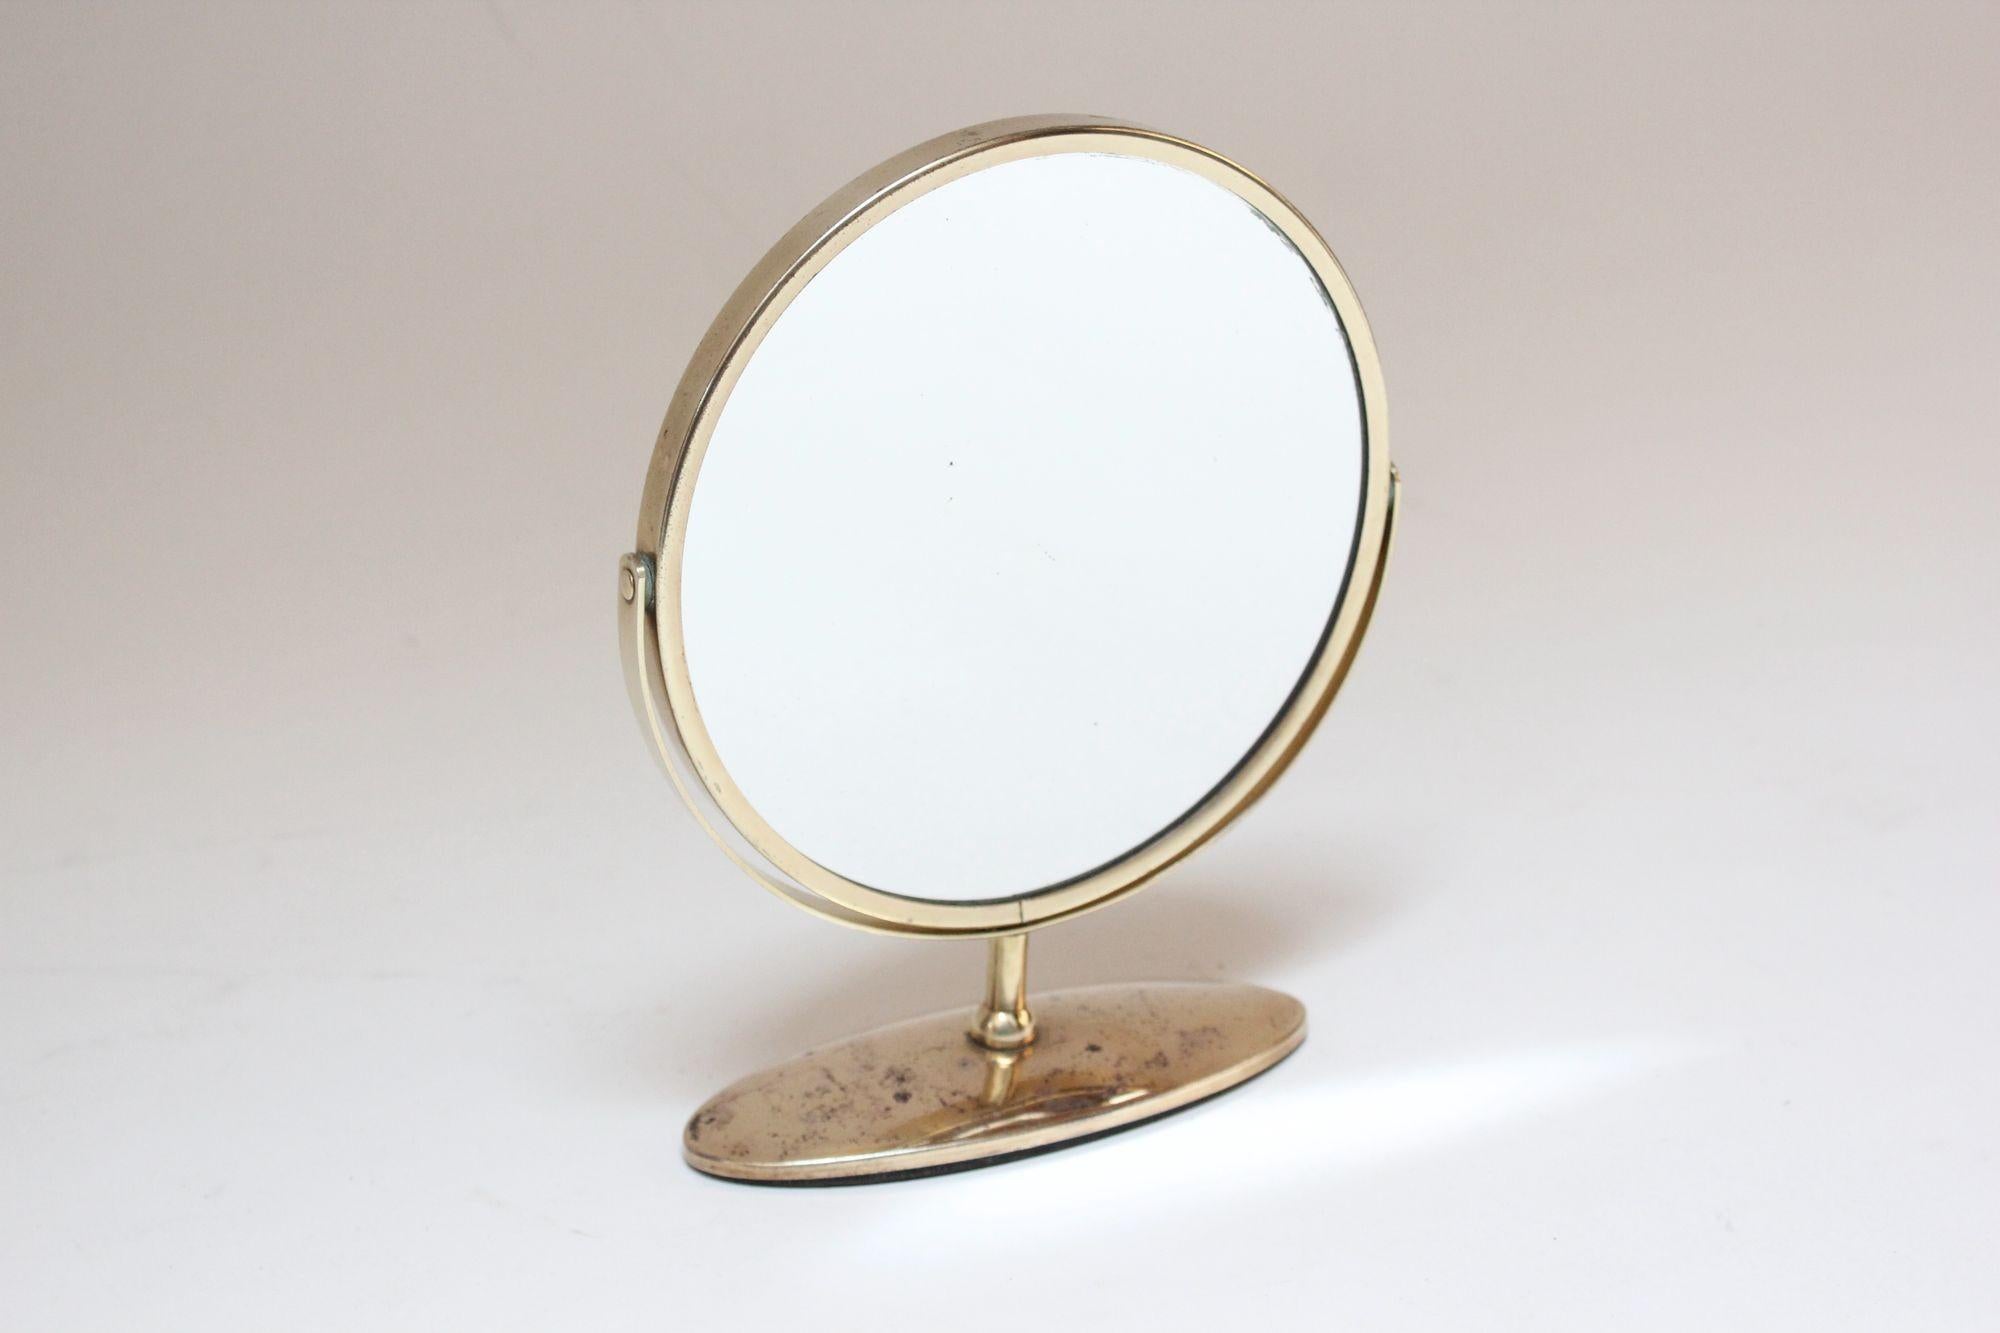 Elegant and petite table/vanity mirror in brass (ca. 1950s, USA).
Mirror has two glass sides and can swivel from one to the other.
Brass has been newly polished but tarnish spots remain (largely to the base) as shown.
The mirror glass on both sides